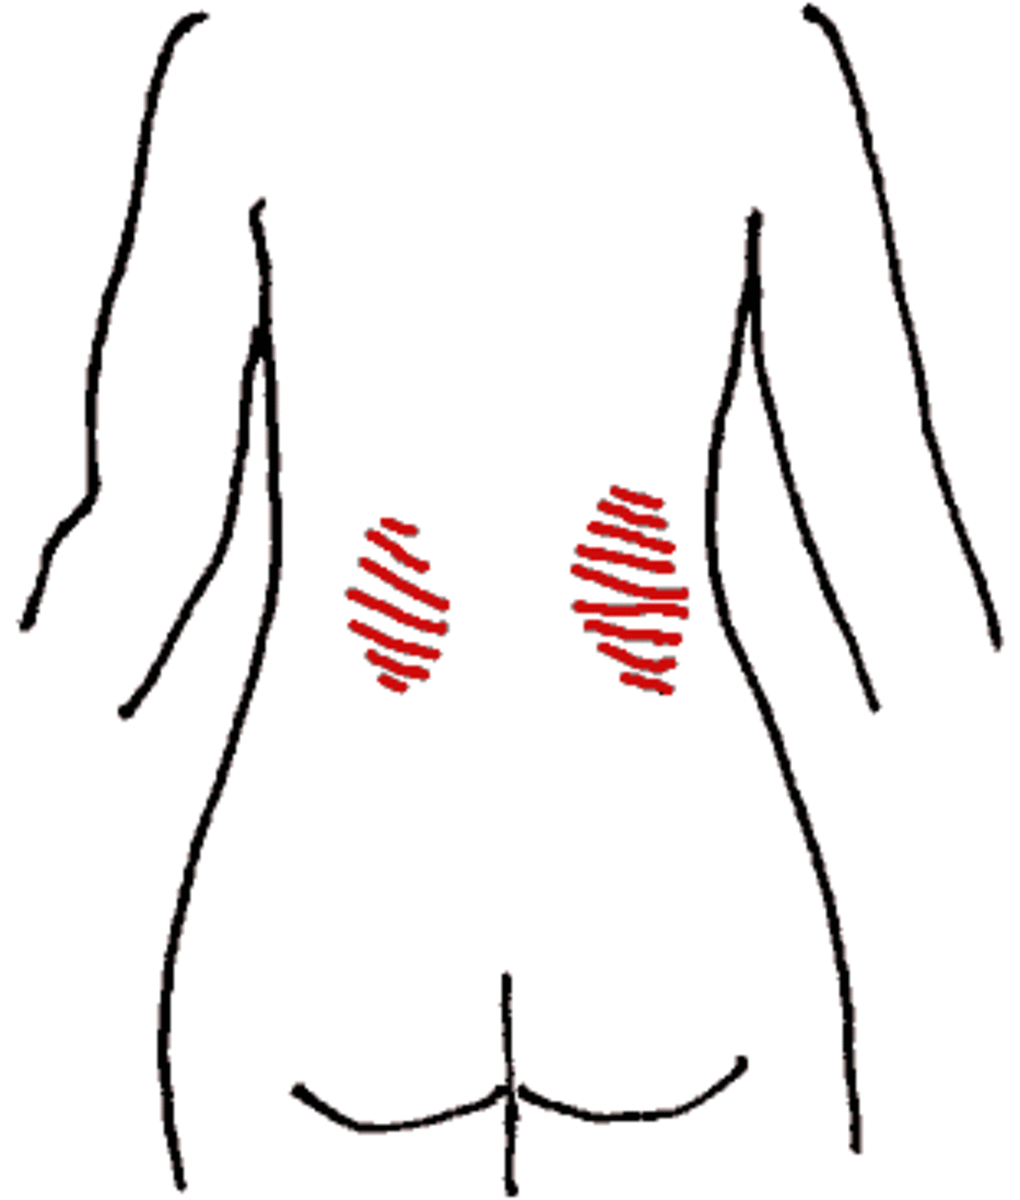 The position of the kidneys